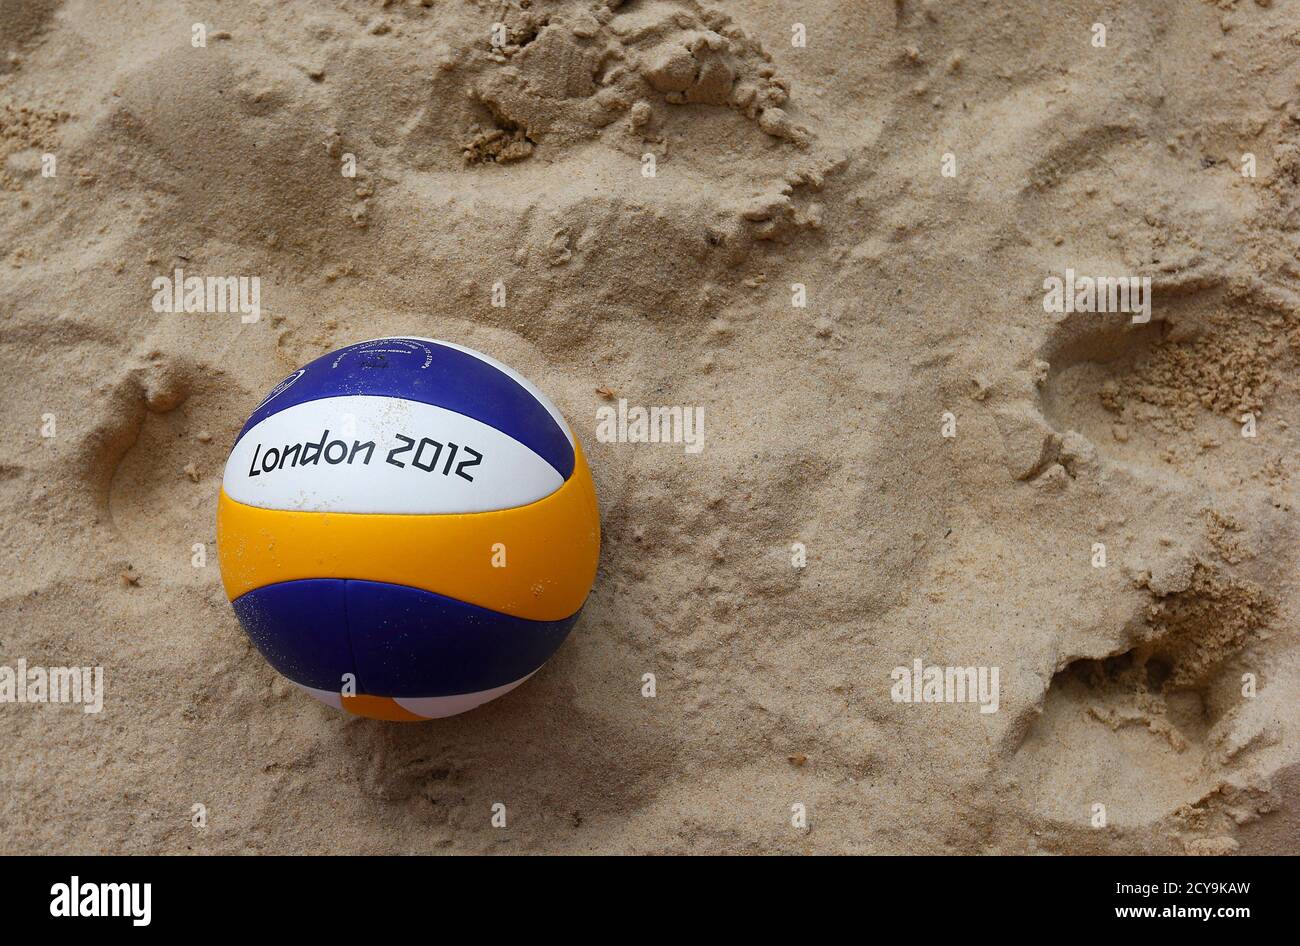 A London 2012 beach volleyball lies on the sand following a training session at the London 2012 Olympics beach volleyball venue in central London July 19, 2012. REUTERS/Suzanne Plunkett (BRITAIN - Tags: SPORT OLYMPICS SOCIETY VOLLEYBALL) Stock Photo